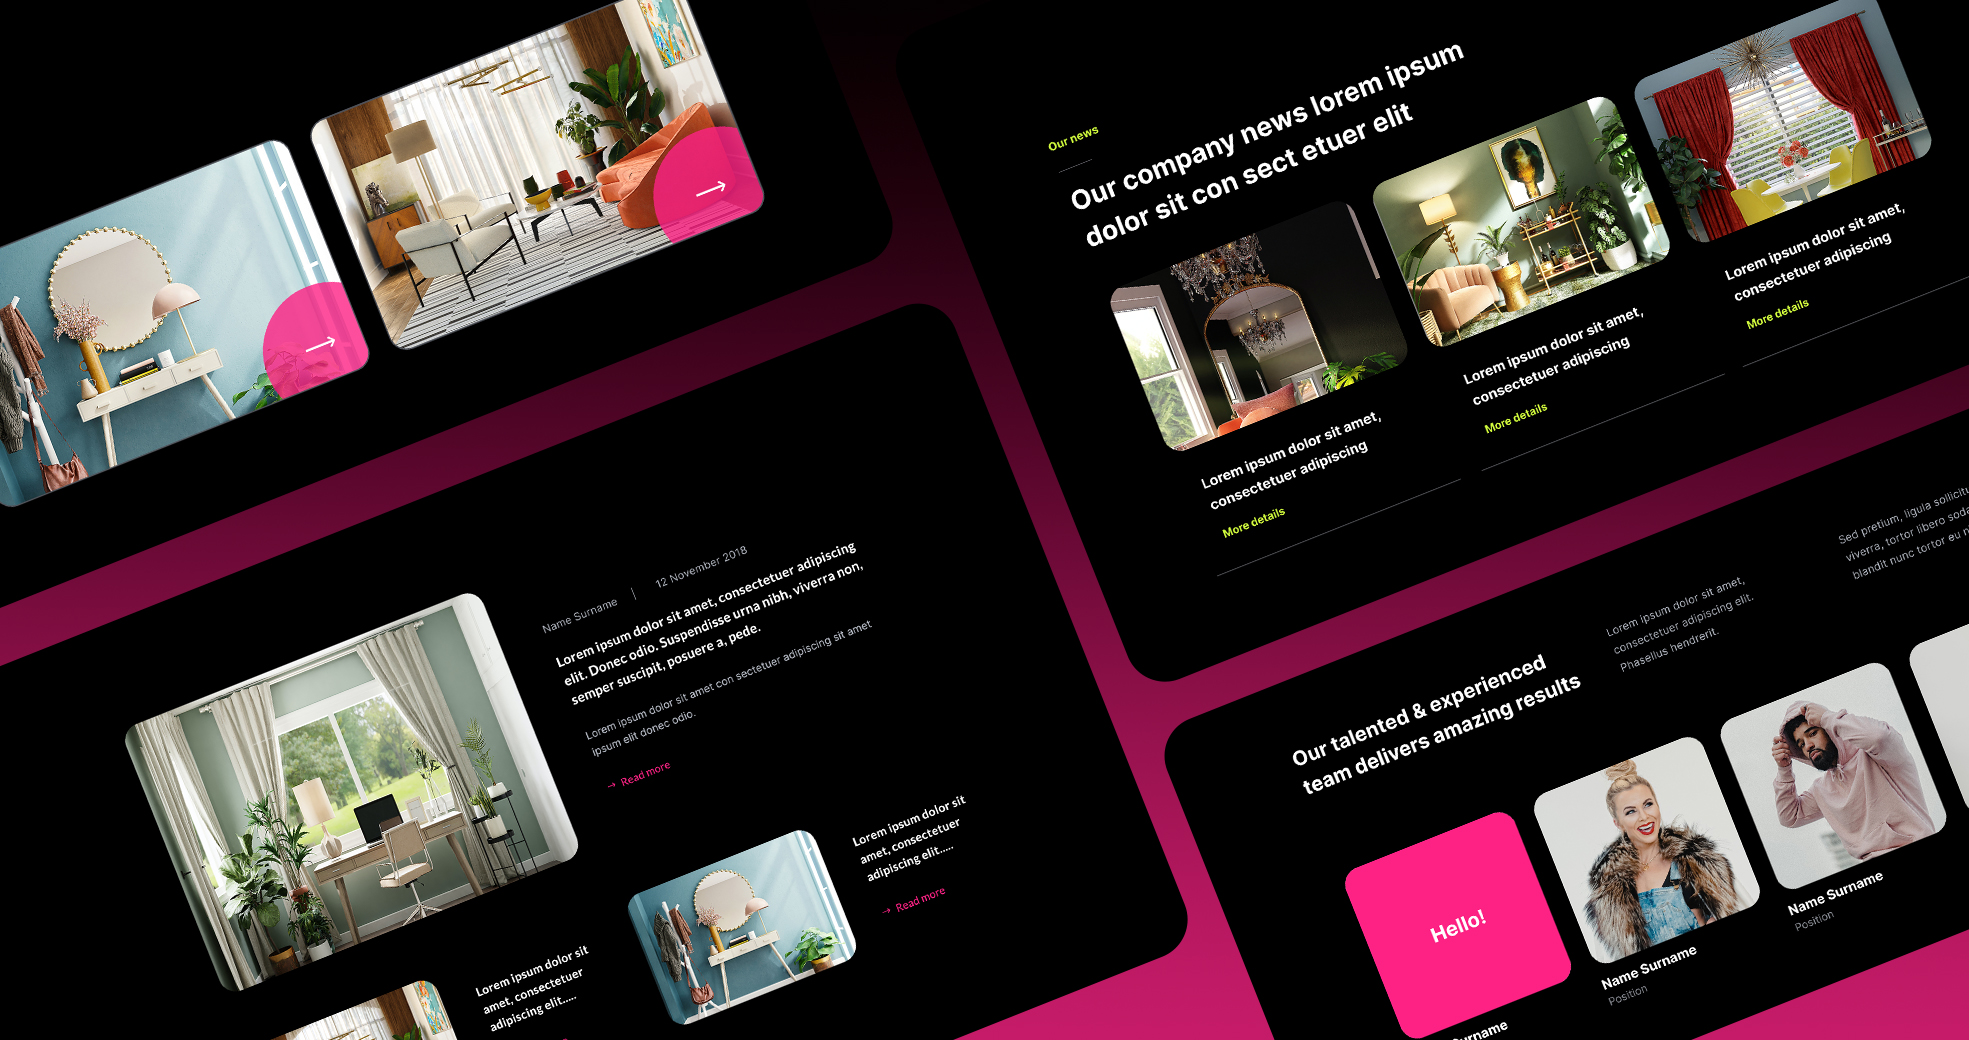 A collage of modern Divi Blog layouts and team member photos showcased on a sleek, black-background website layout.